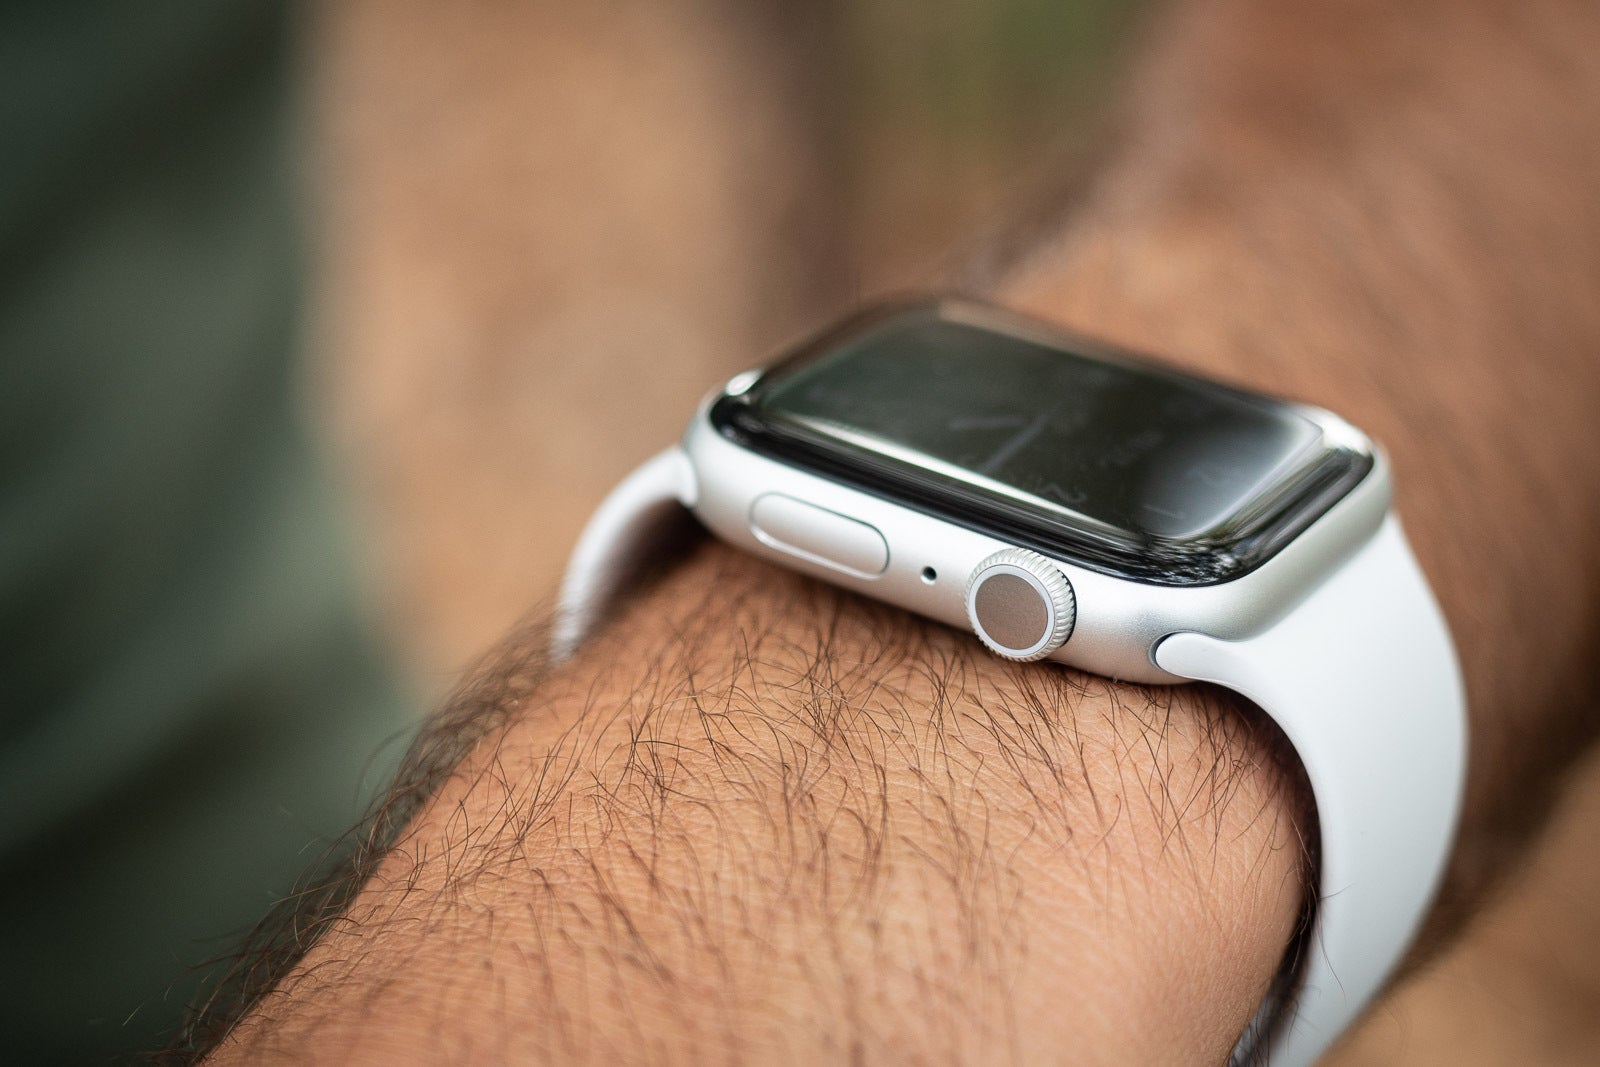 Future Apple Watch to boast panic attack detection, other mental health features